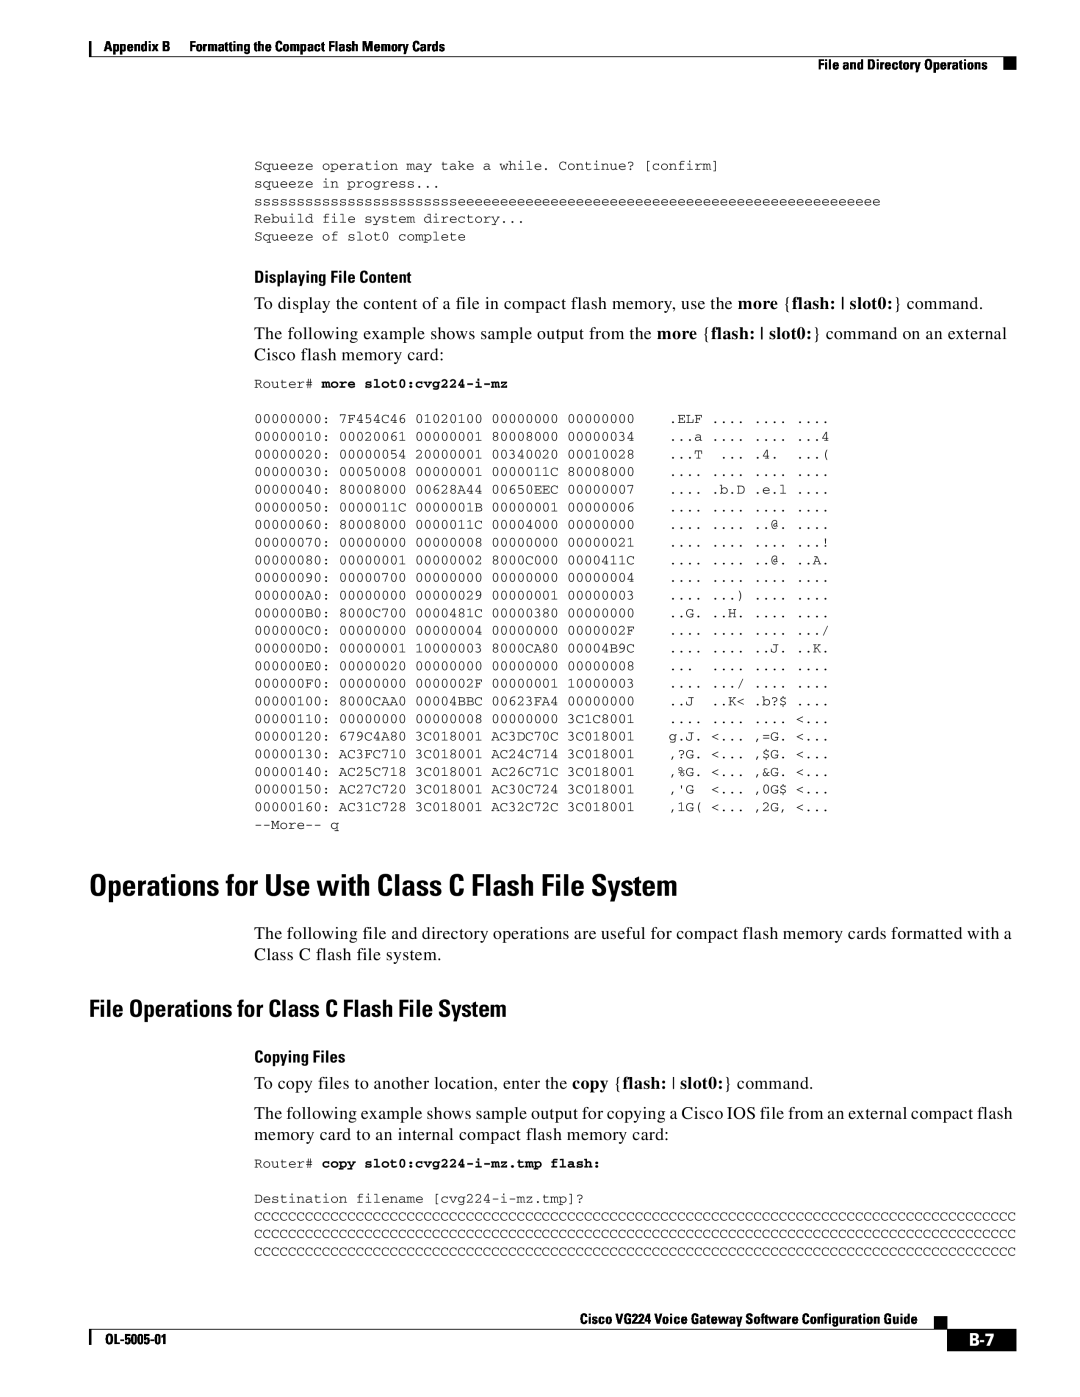 Cisco Systems VG224 manual Operations for Use with Class C Flash File System, File Operations for Class C Flash File System 